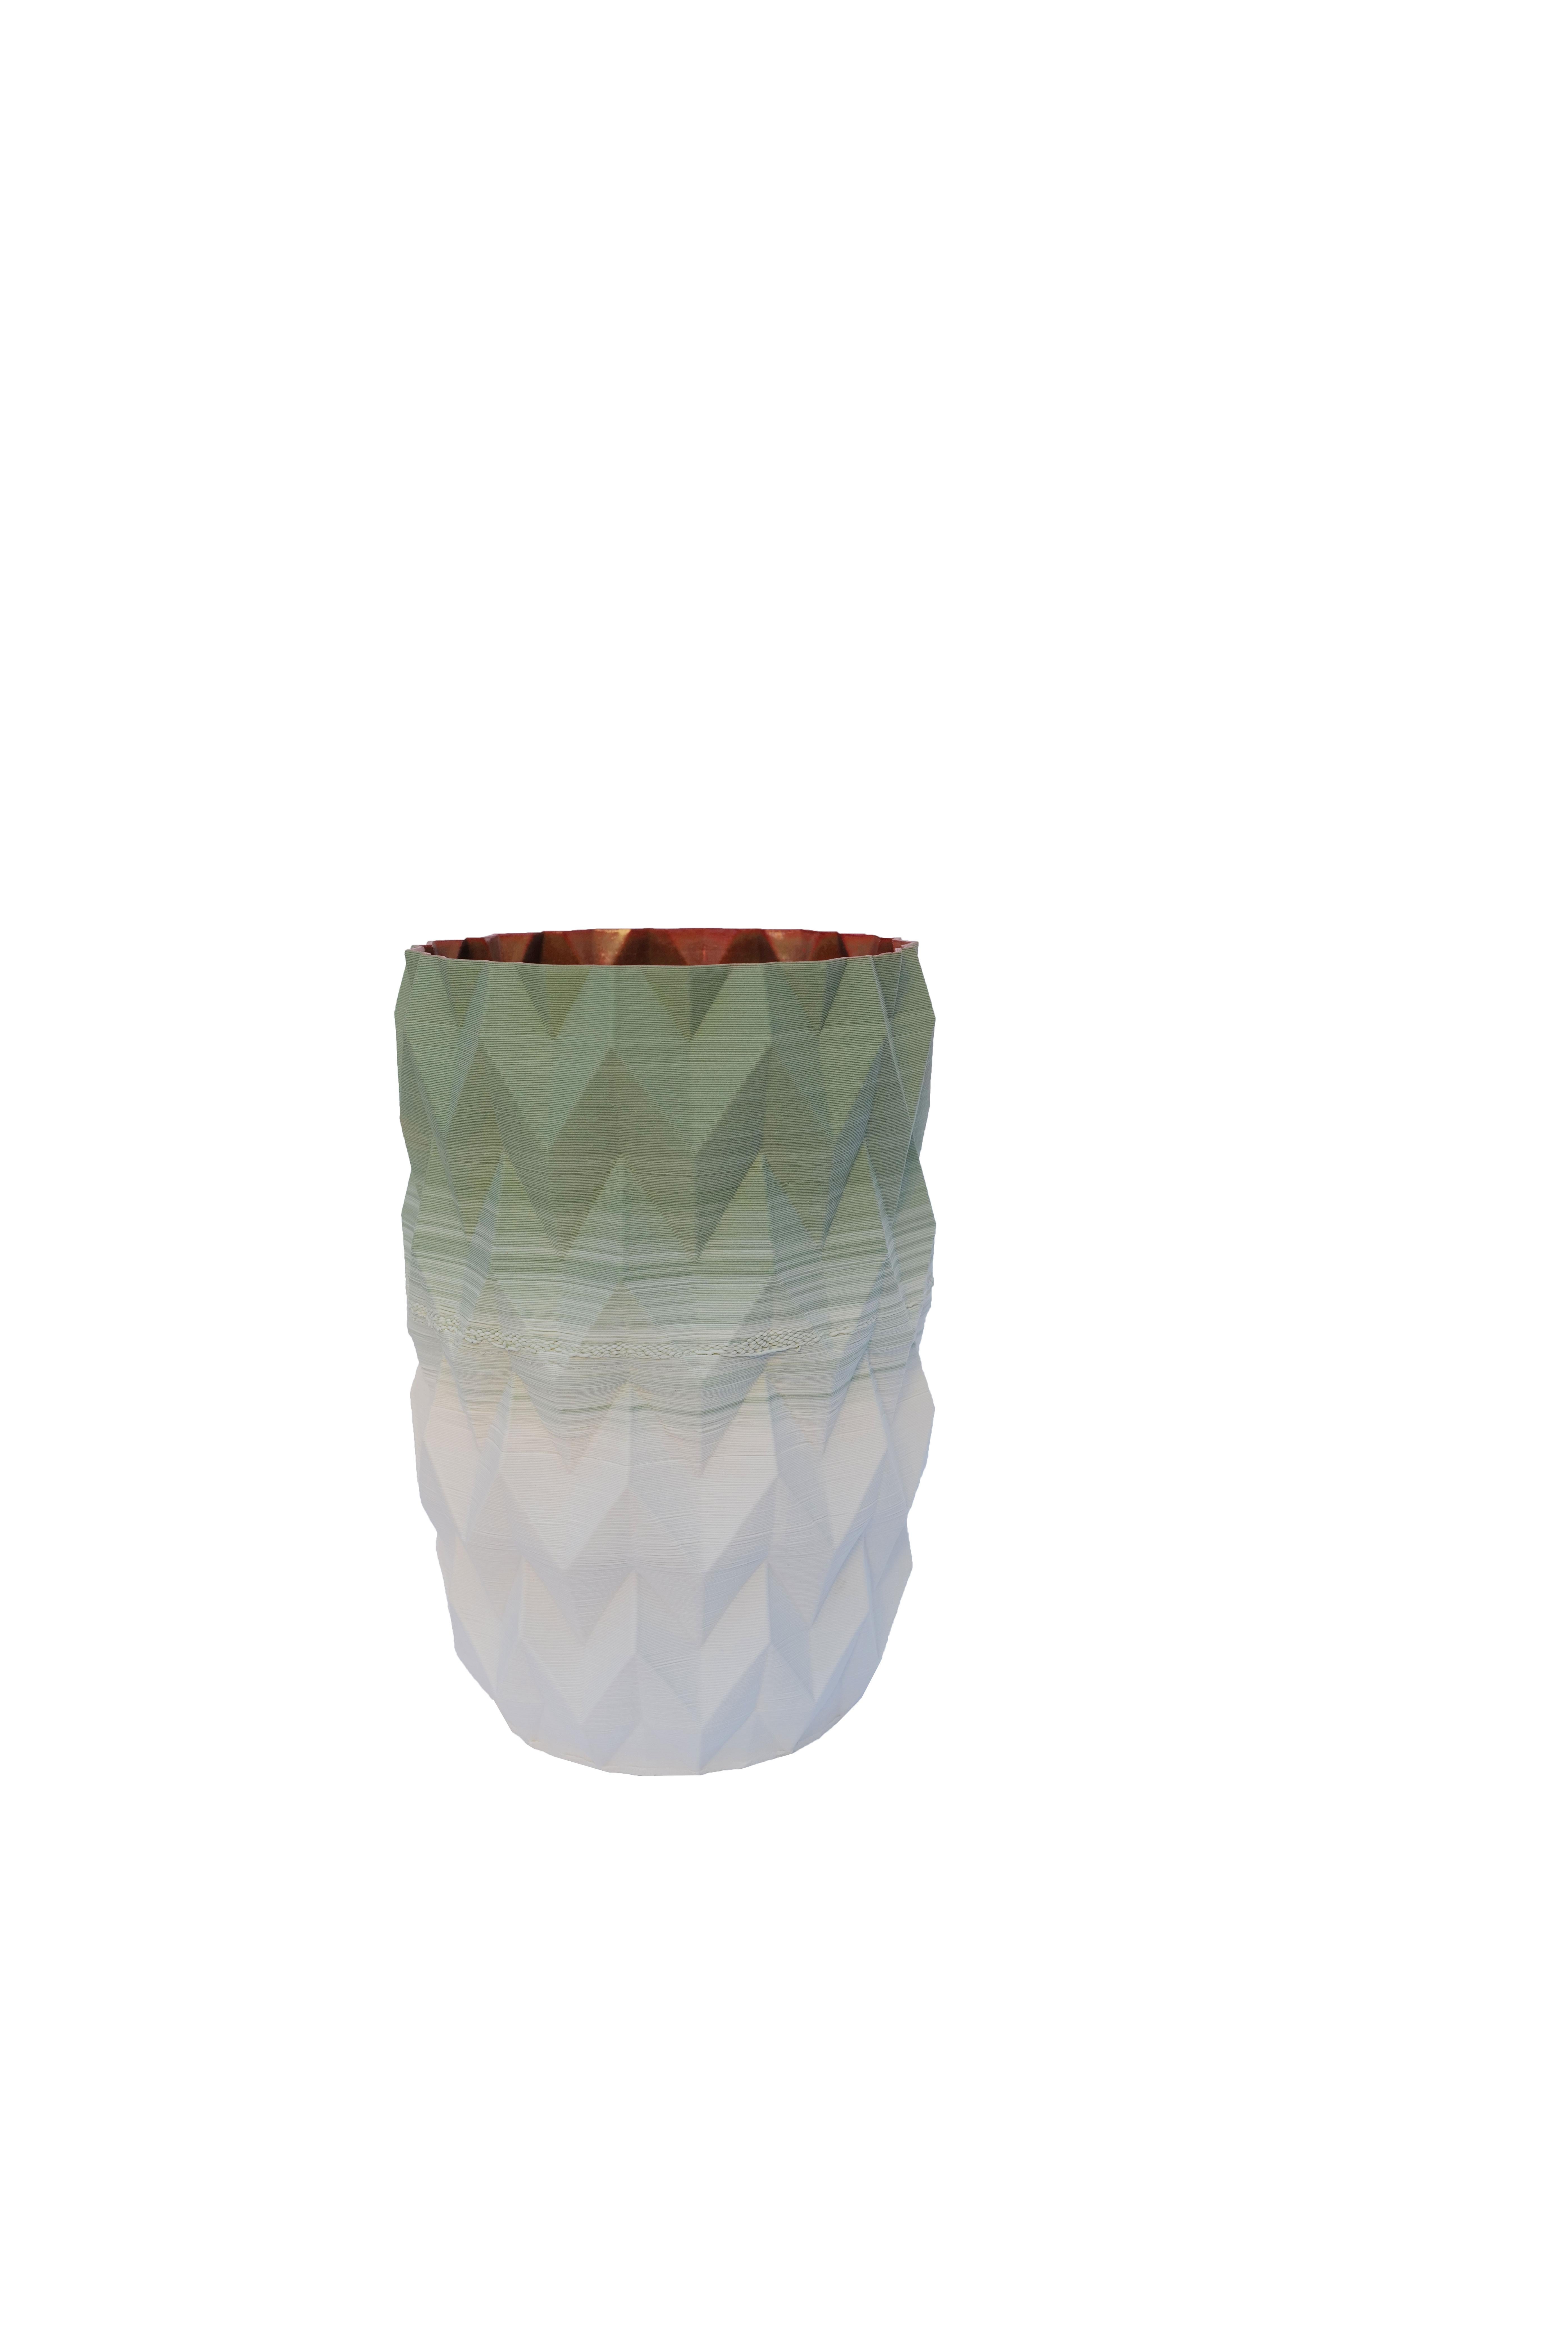 European 21st Century Porcelain Pleated Set of 3 Vases Hand Painted Glazed Faience, Italy For Sale